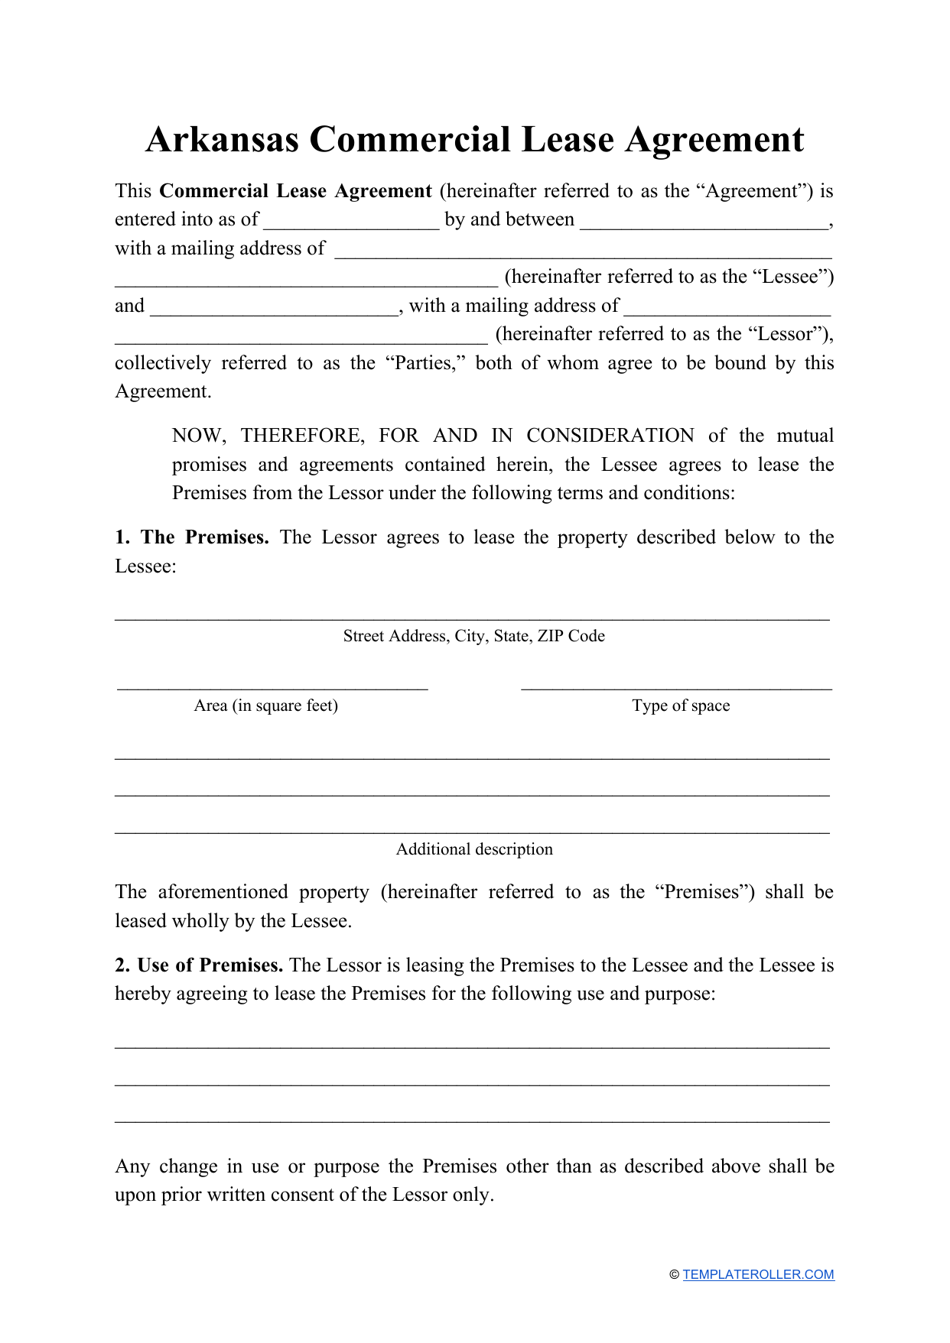 Commercial Lease Agreement Template - Arkansas, Page 1